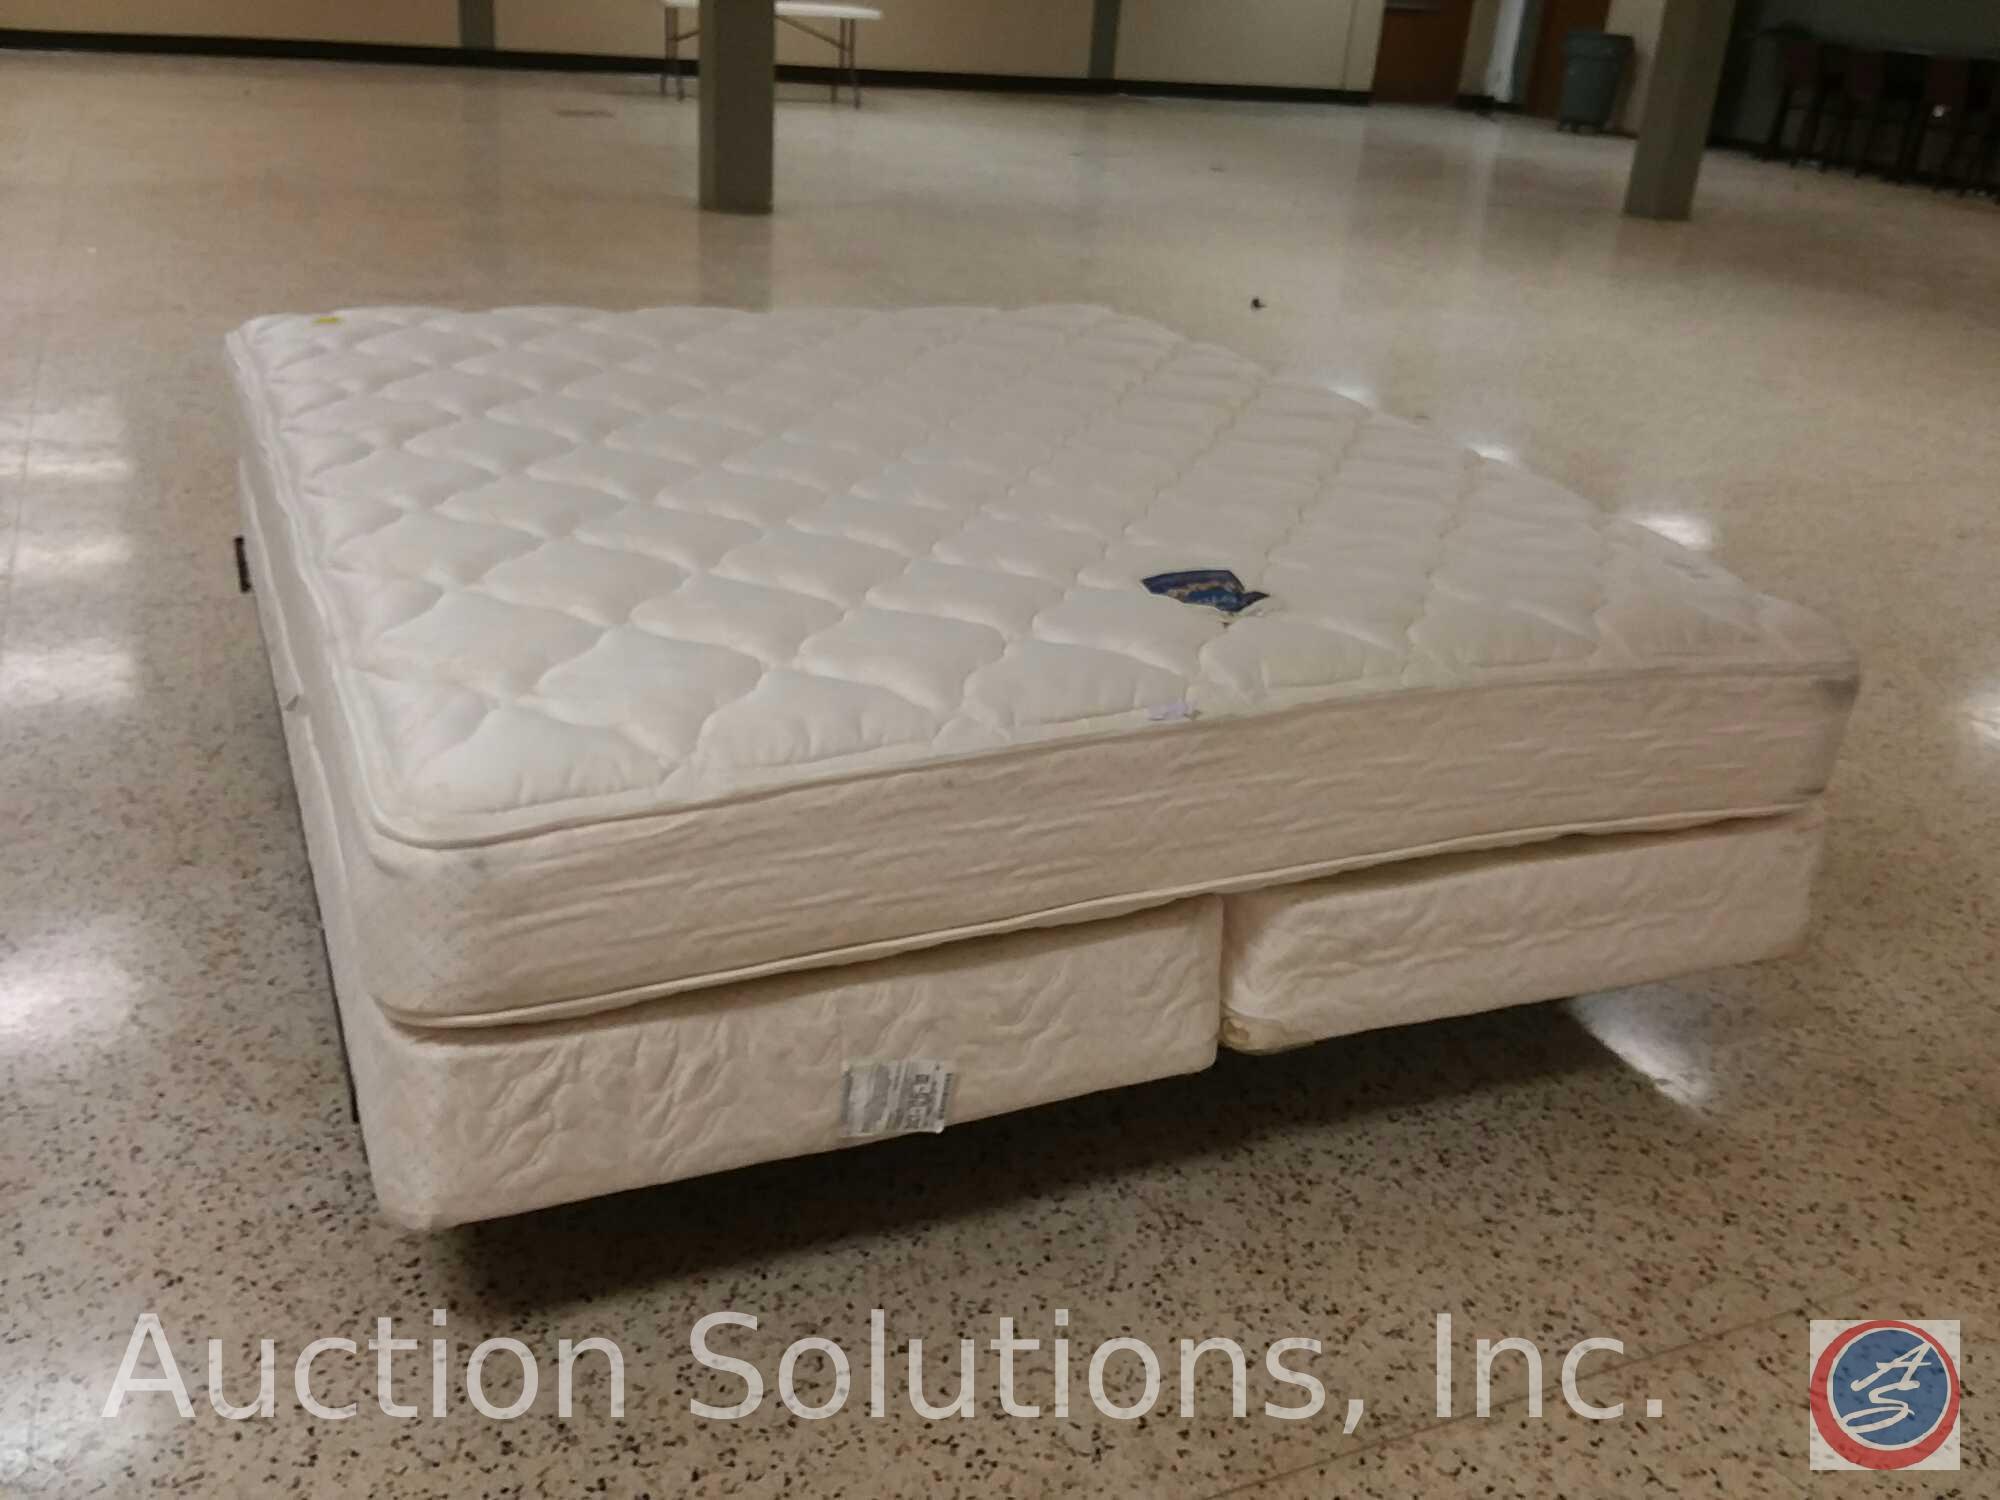 Hilton 'Suite Dreams' King Bed Made by Serta - Featuring Fireblocker Fiber - Includes Perfect